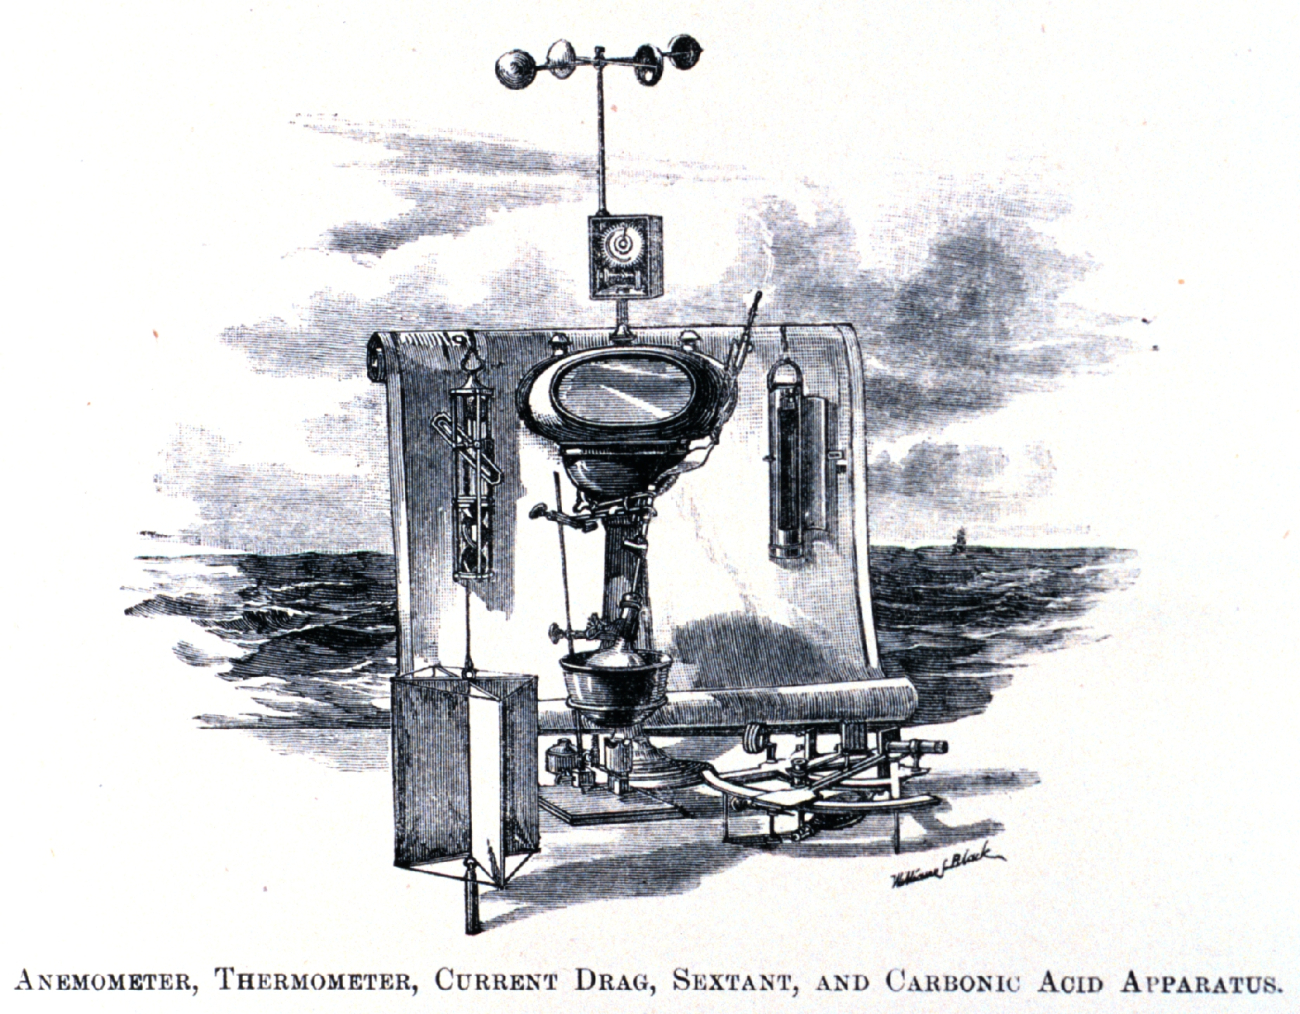 Anemometer, thermometer, current drag, sextant, and carbonic acid apparatus